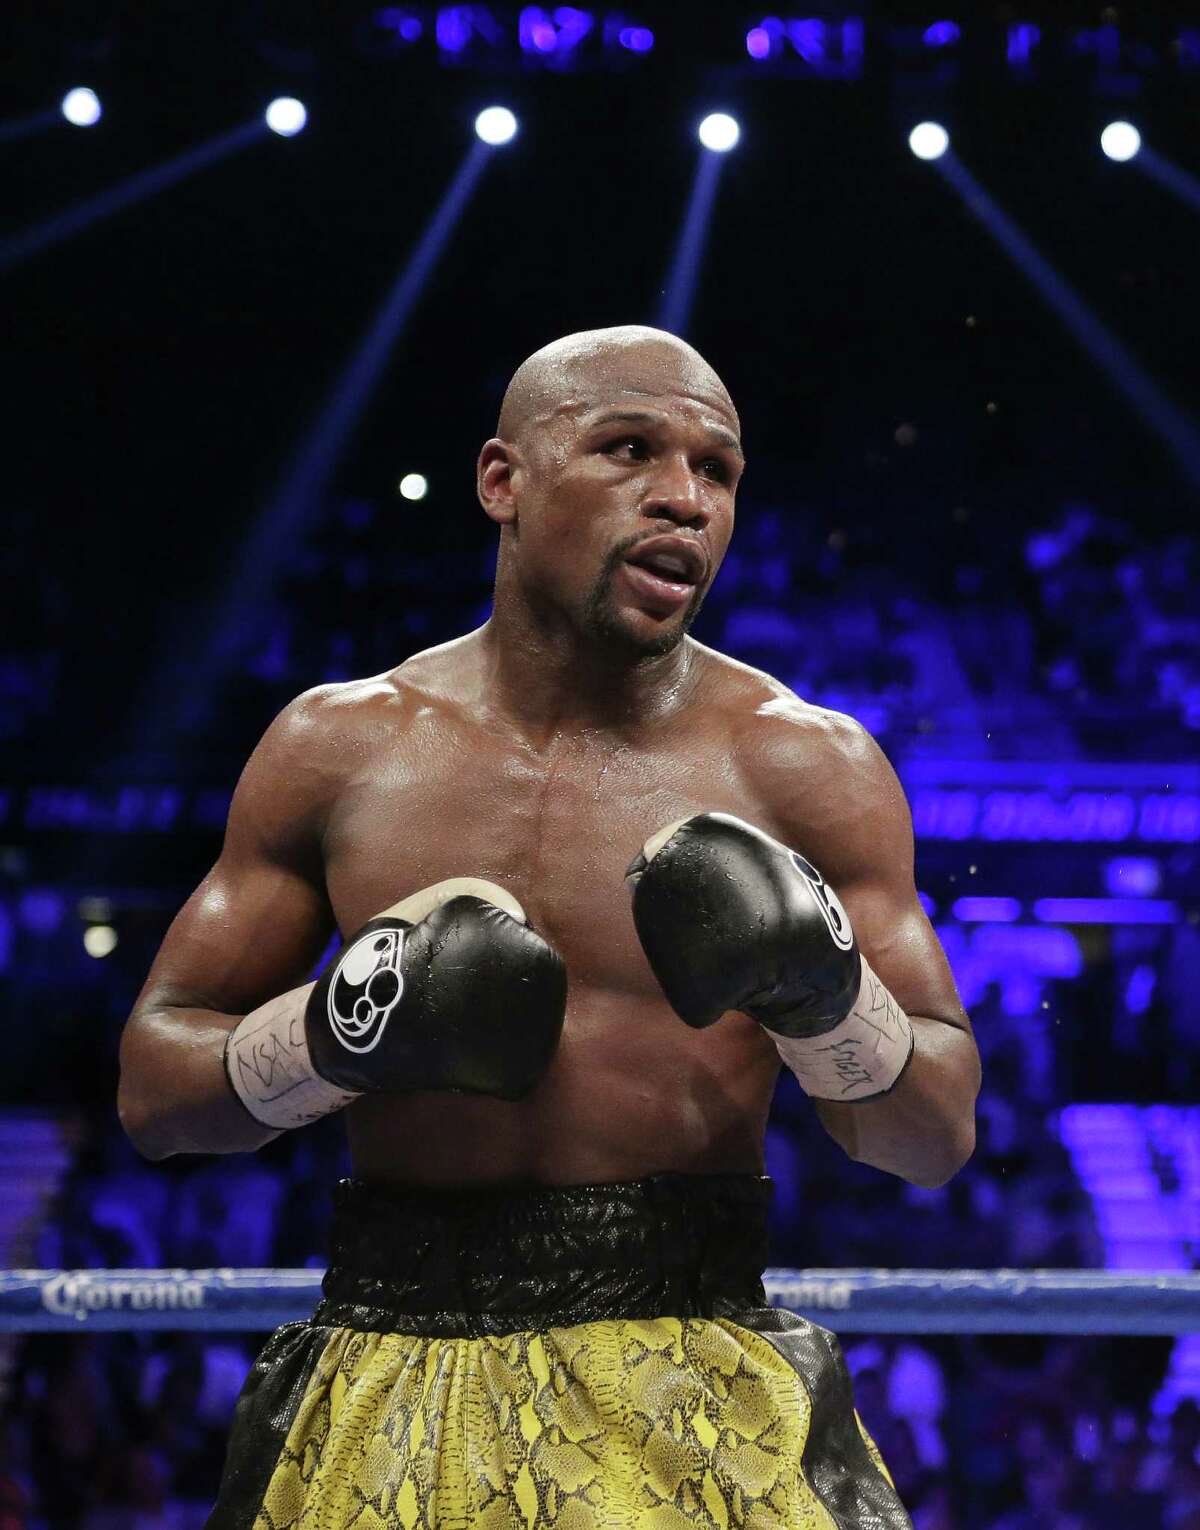 Floyd Mayweather Jr. is scheduled to put his 44-0 record on the line Sept. 14 in Las Vegas against Saul “Canelo” Alvarez.